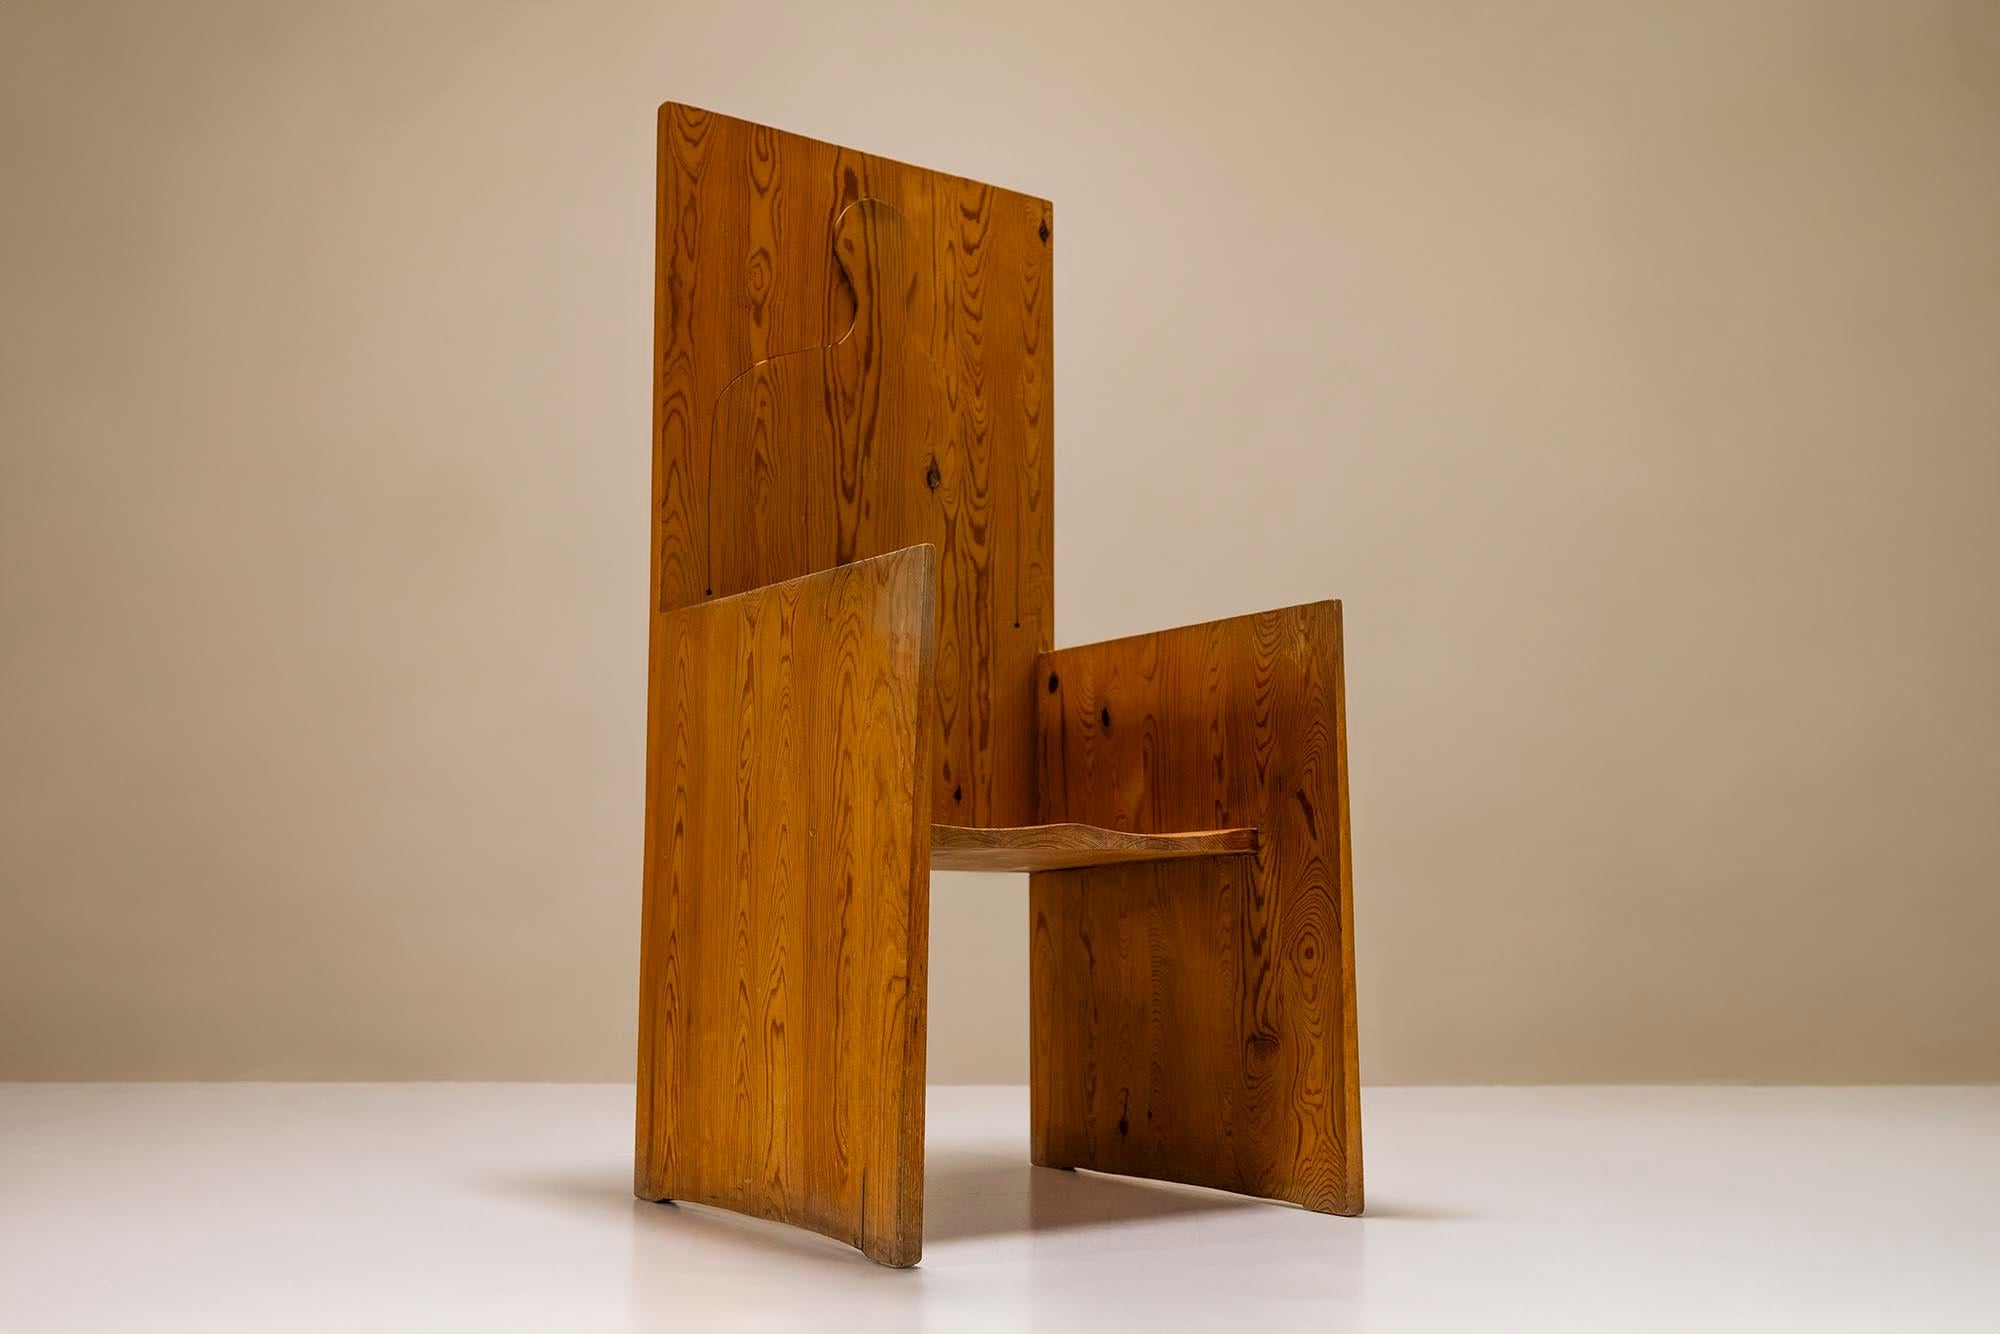 Adamo Highback Chair with Silhouette in Pine by Ugo Marano, Italy 1978 For Sale 1